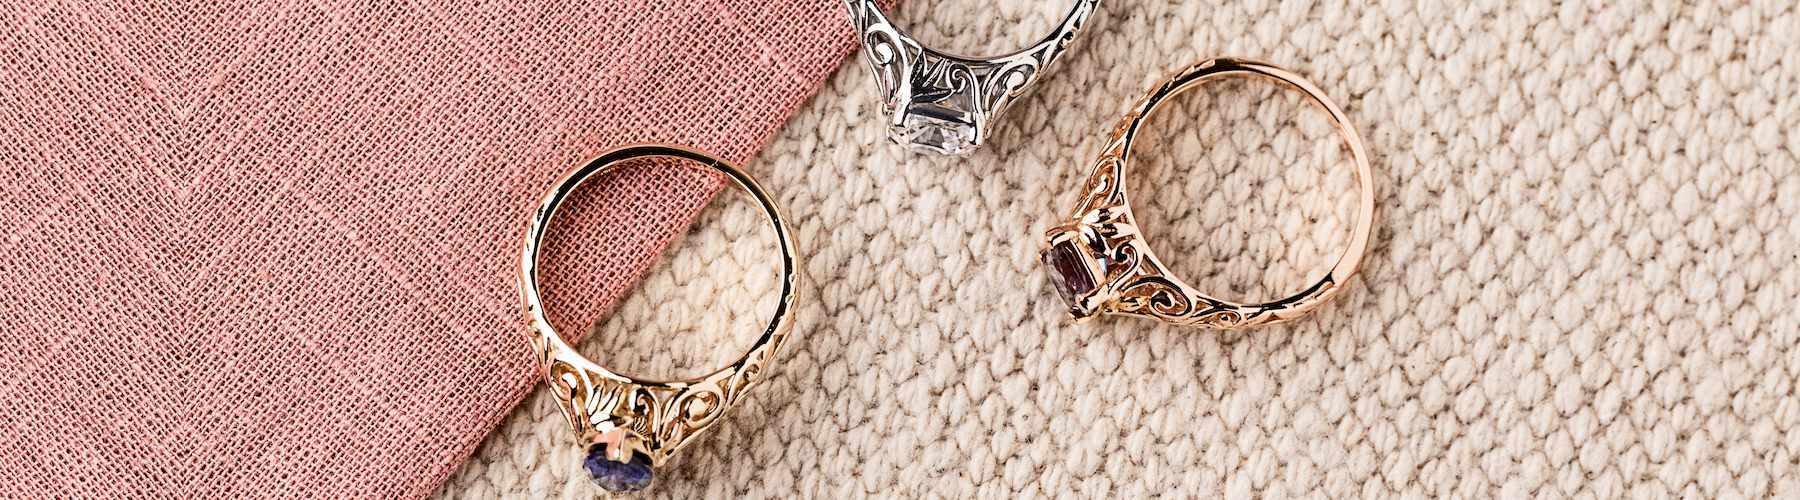 Top 5 Inspirational Ring Designs for Building Your Own Ring